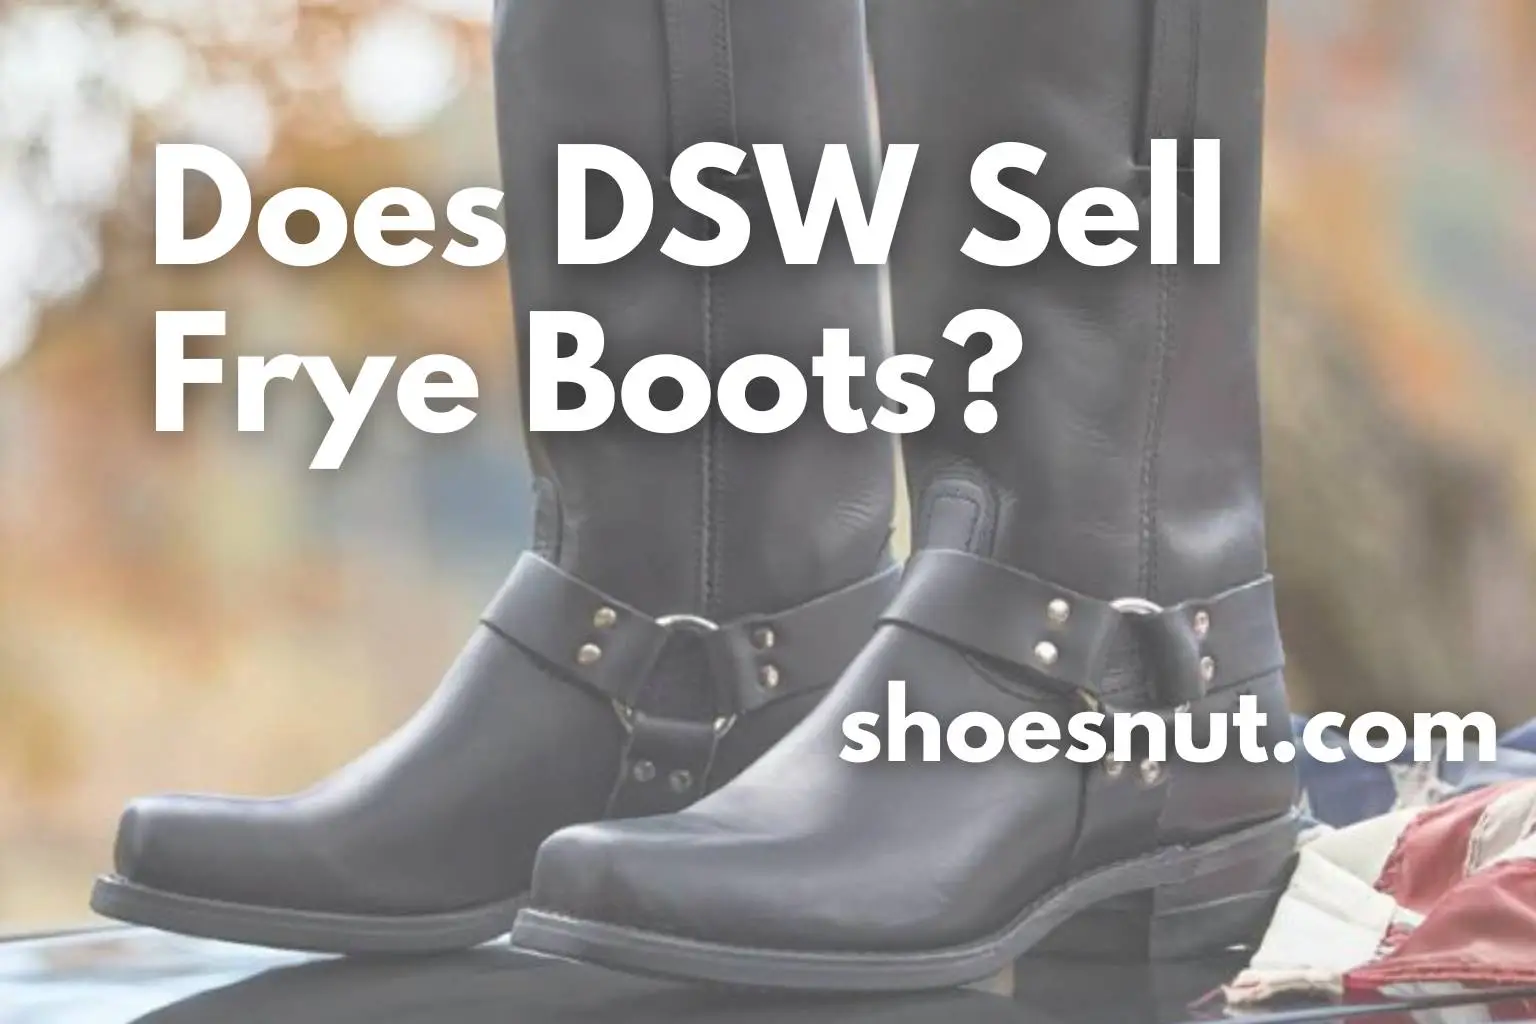 Does DSW Sell Frye Boots?